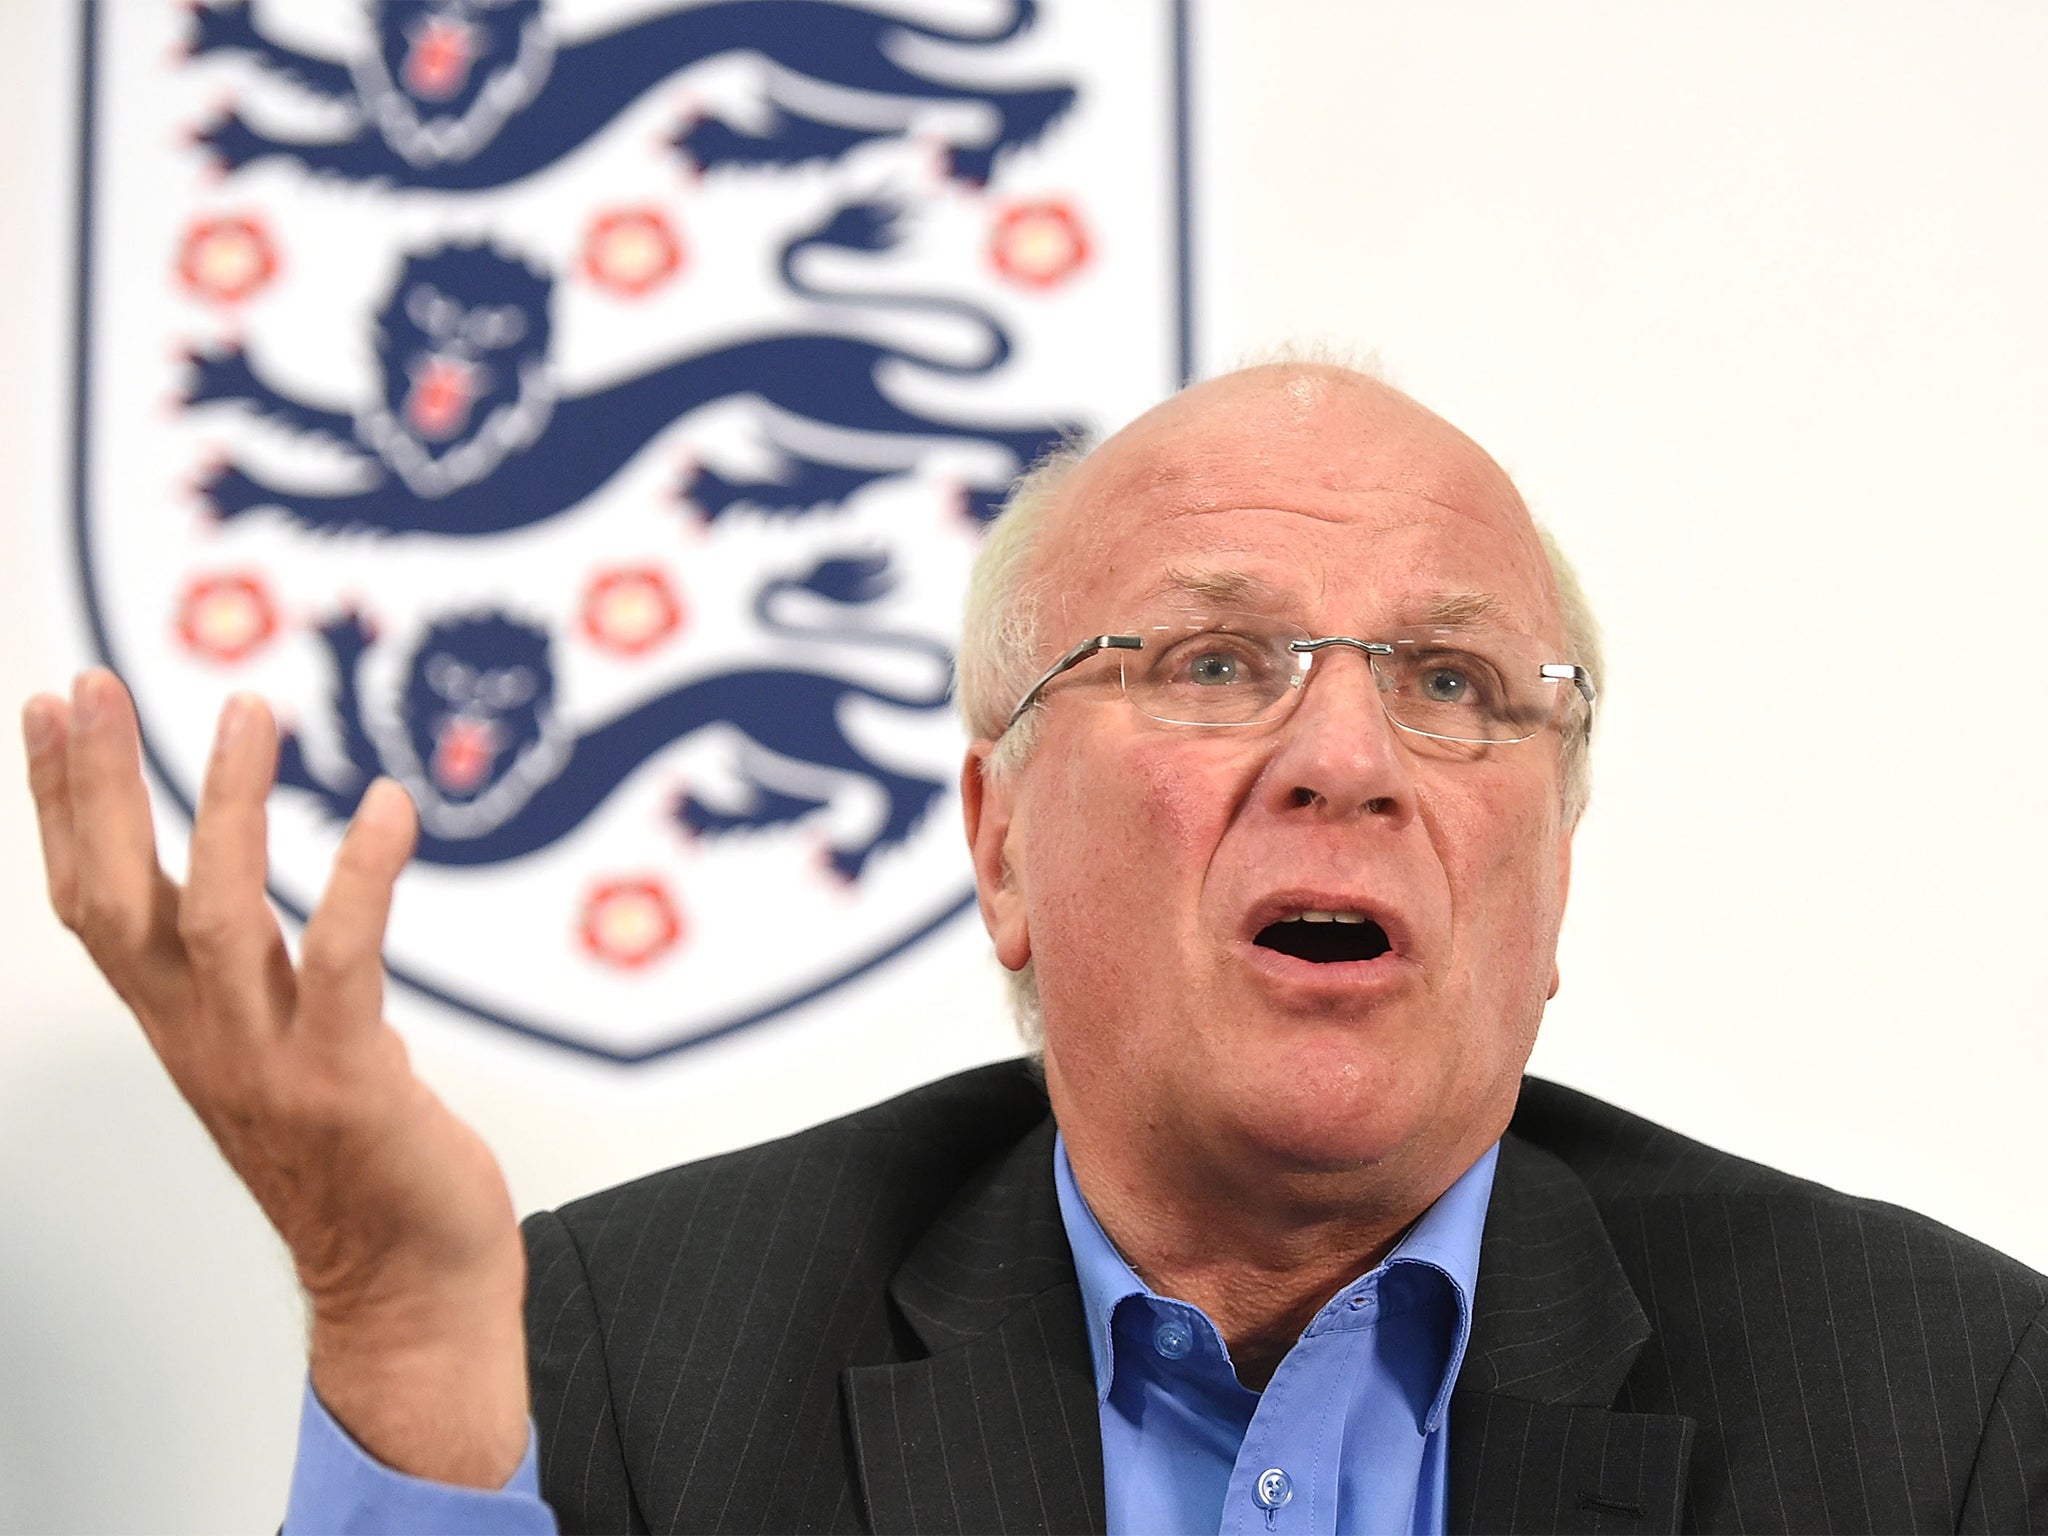 Greg Dyke, the FA chairman, argues that Fifa’s president, Sepp Blatter, needs to step down before any reform can take place